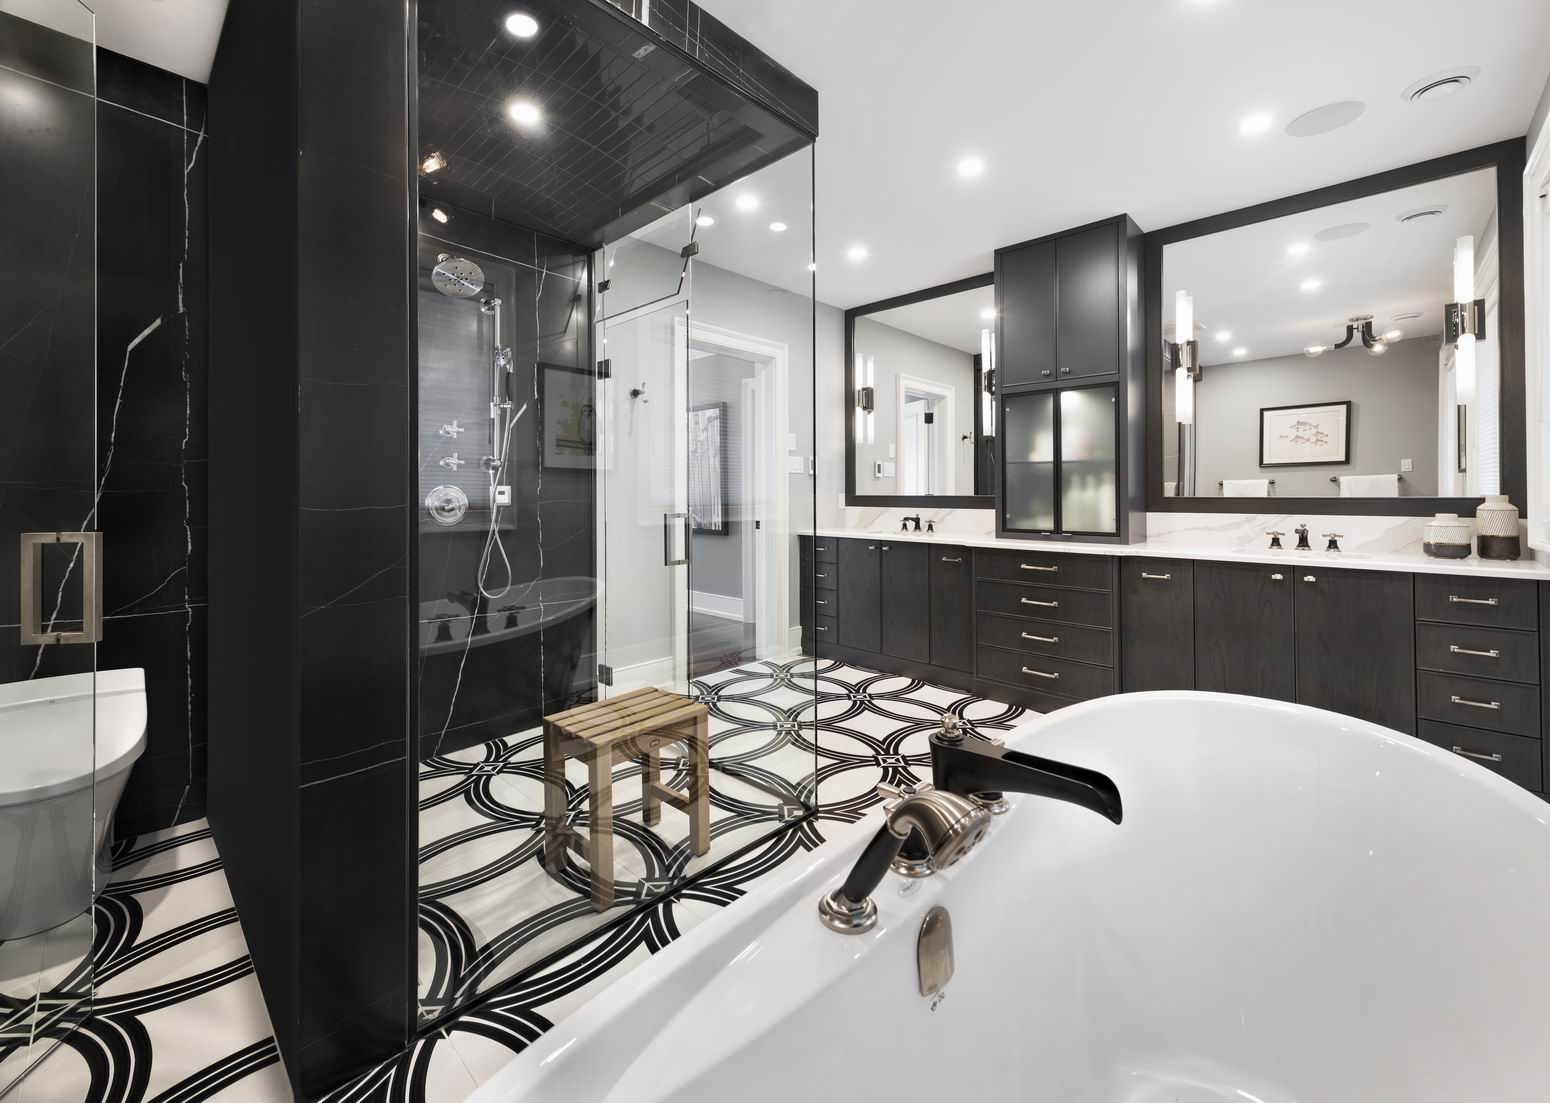 Amsted Design-Build StyleHaus Interiors Irpinia Kitchens black-and-white ensuite steam shower geometric tile